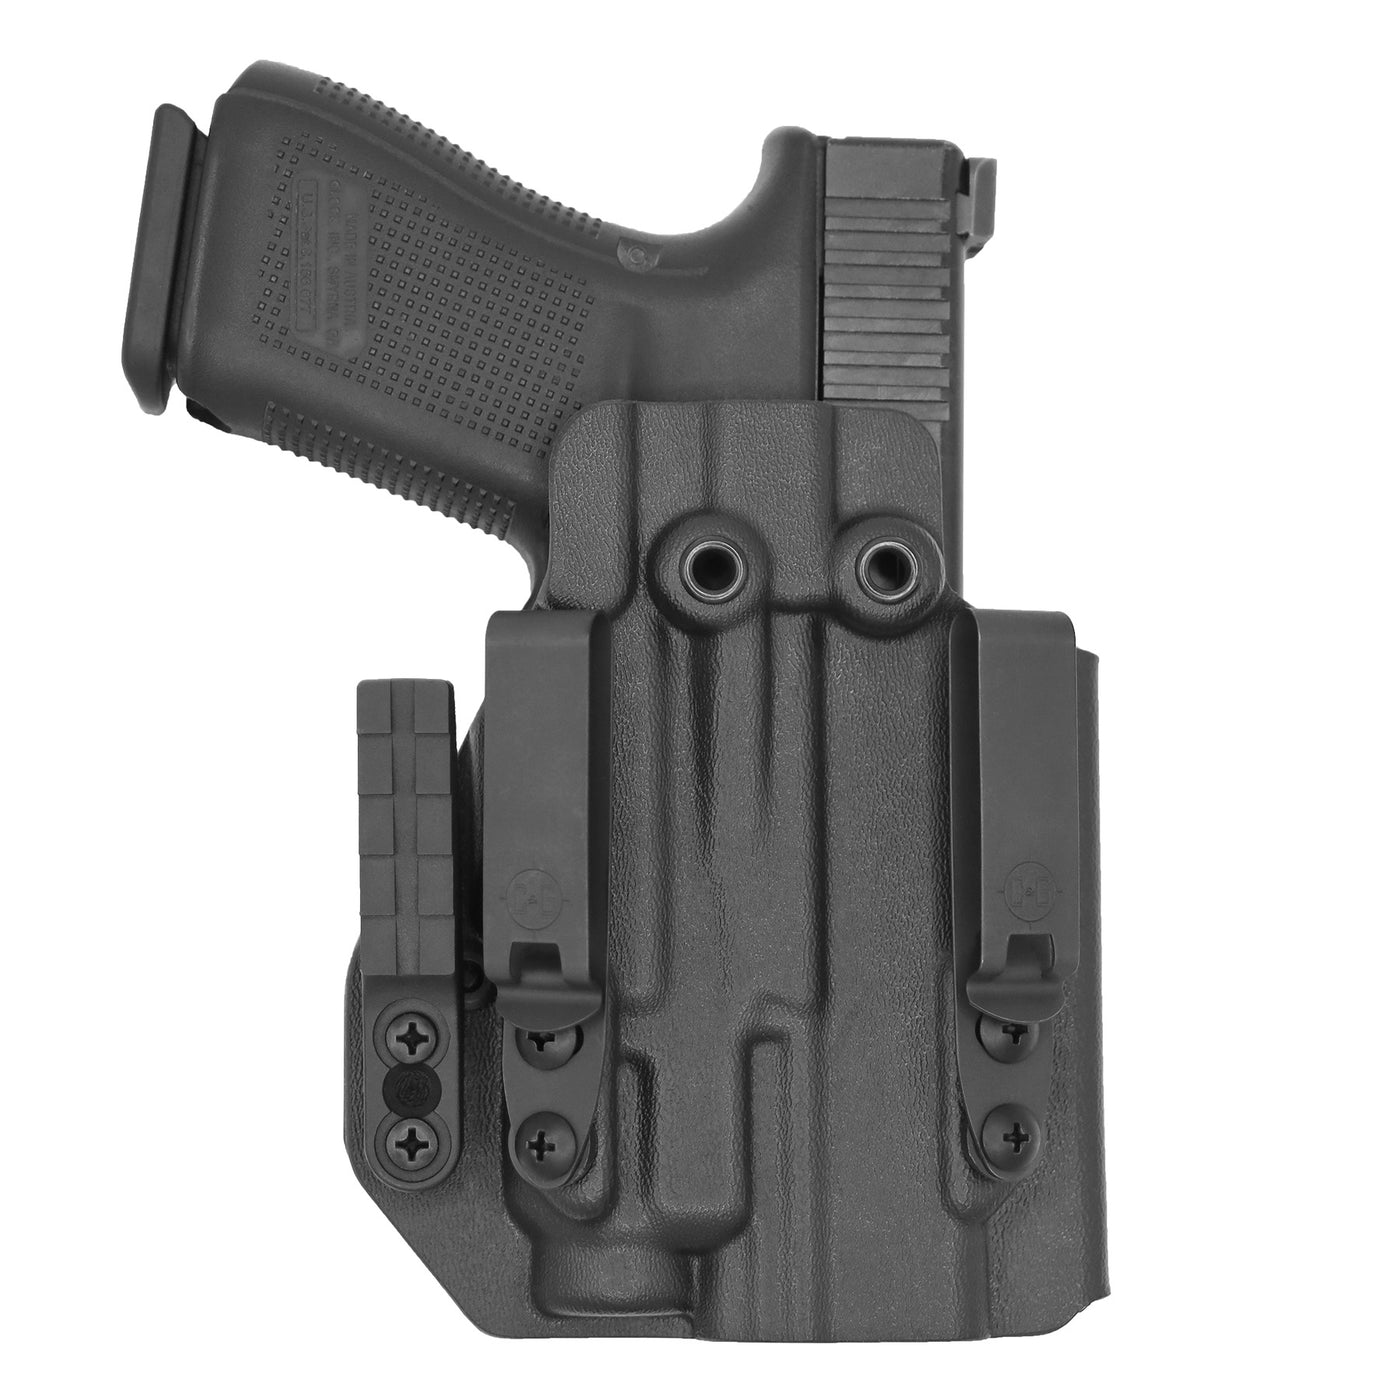 C&G Holsters quickship IWB ALPHA UPGRADE Tactical CZ p10/c streamlight tlr7/a in holstered position